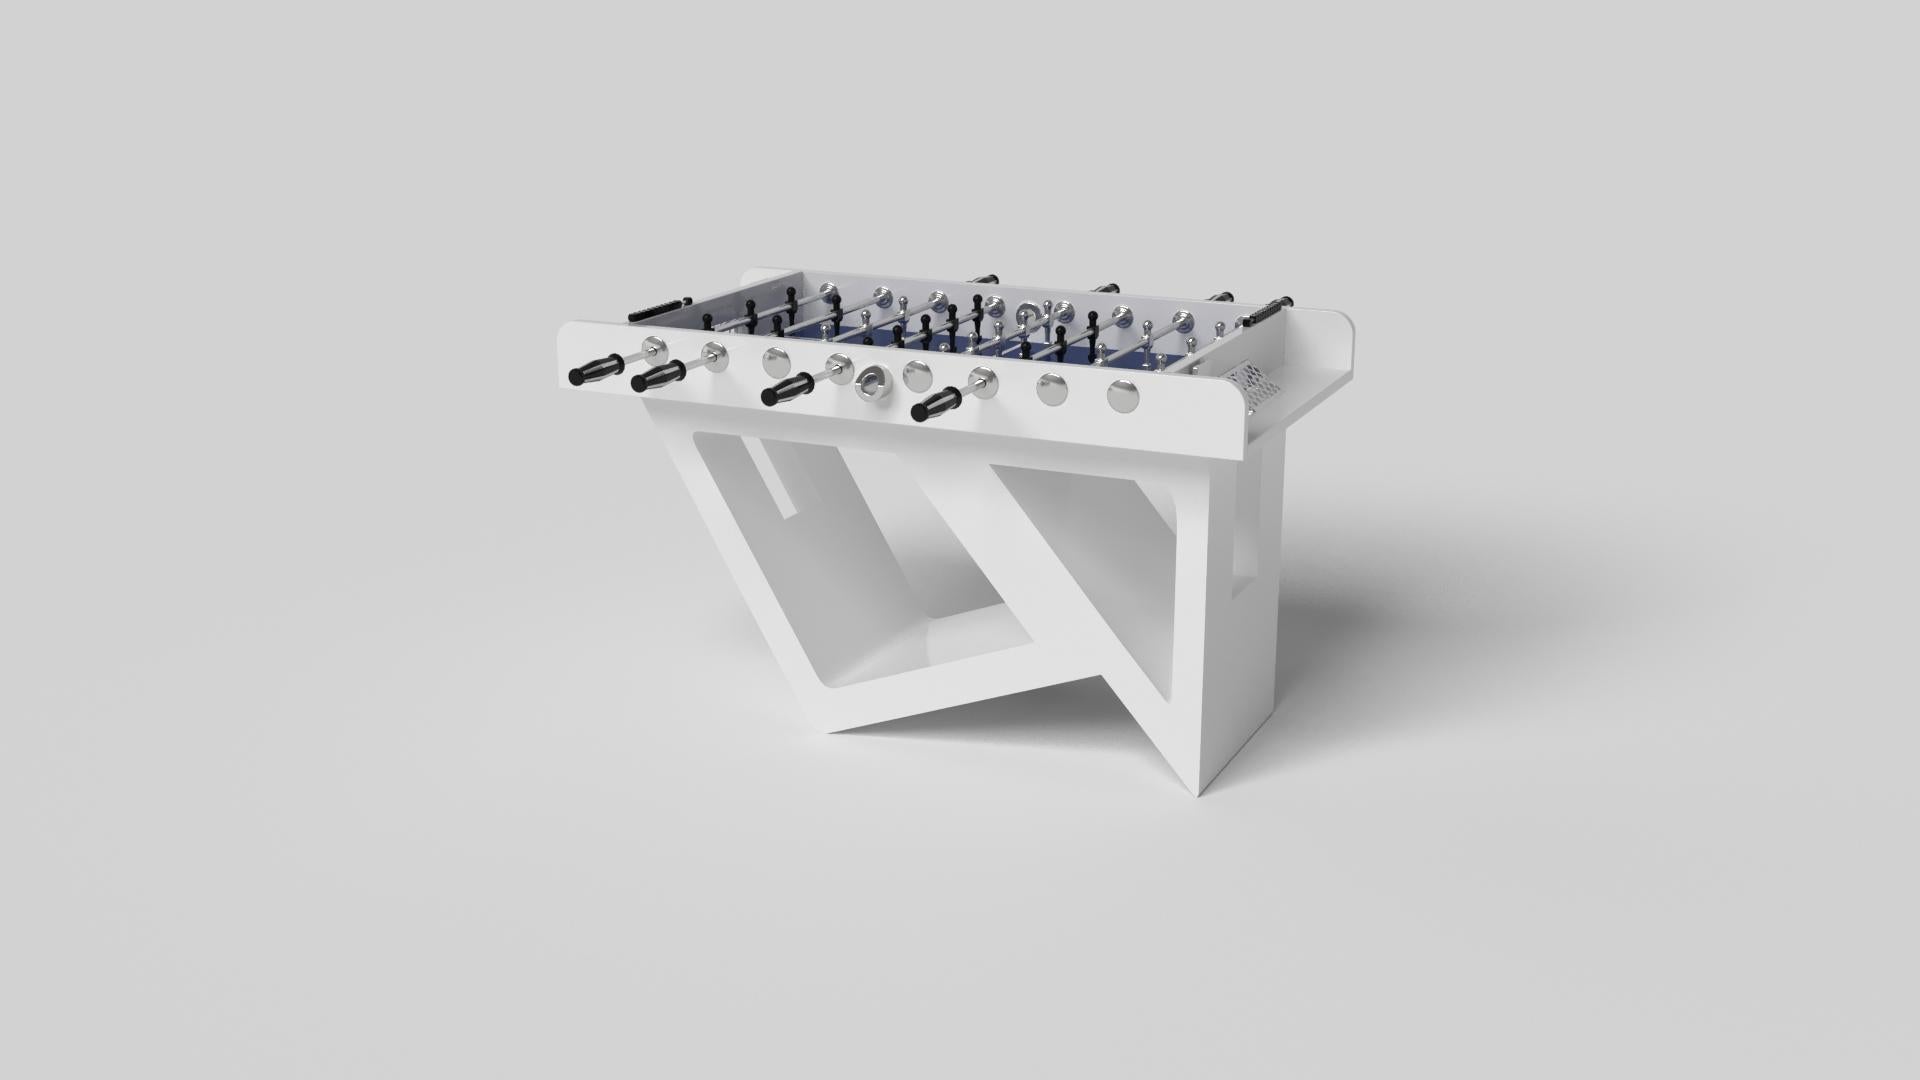 Drawing inspiration from the beauty of geometric forms, the Rumba foosball table in brushed aluminum is characterized by a series of hollow and solid shapes that form an offset asymmetric base. Accented with a high-action top for professional game